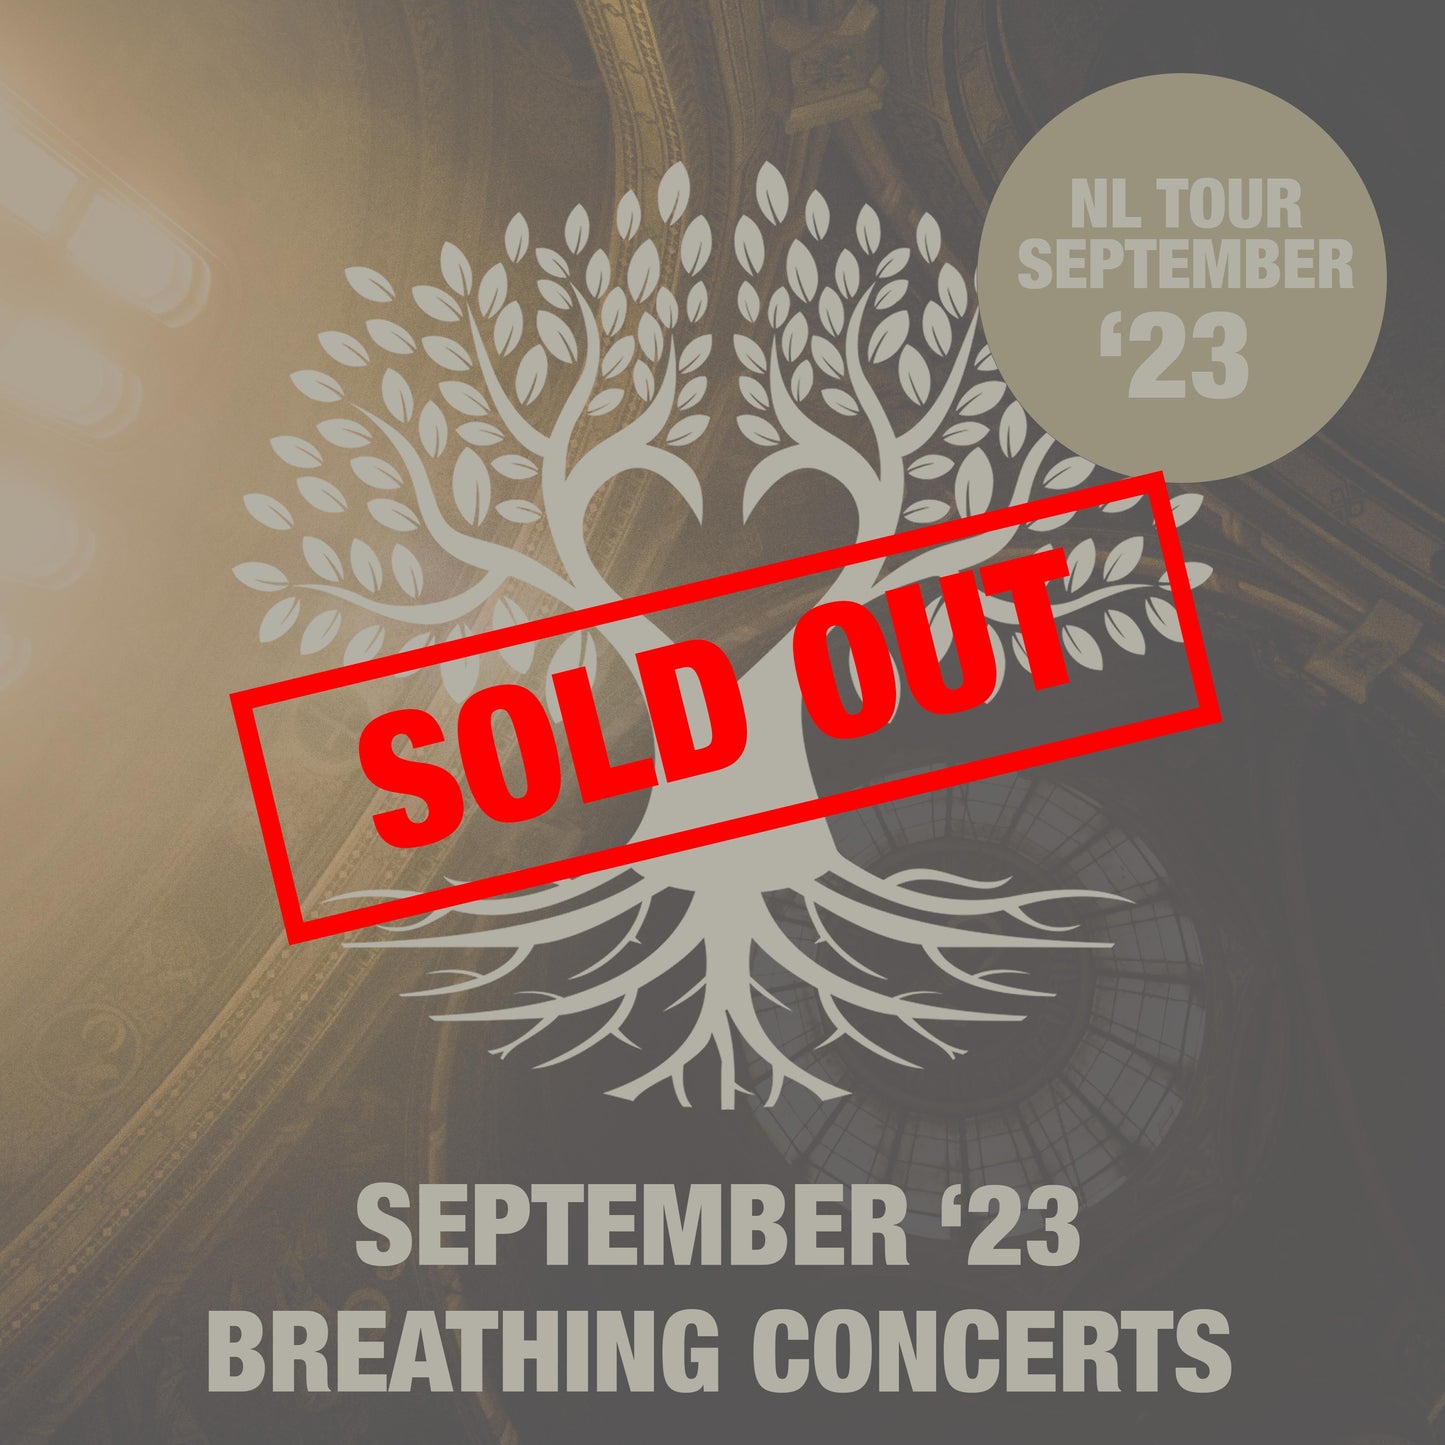 Breathing Concerts - NL Tour September (SOLD OUT)